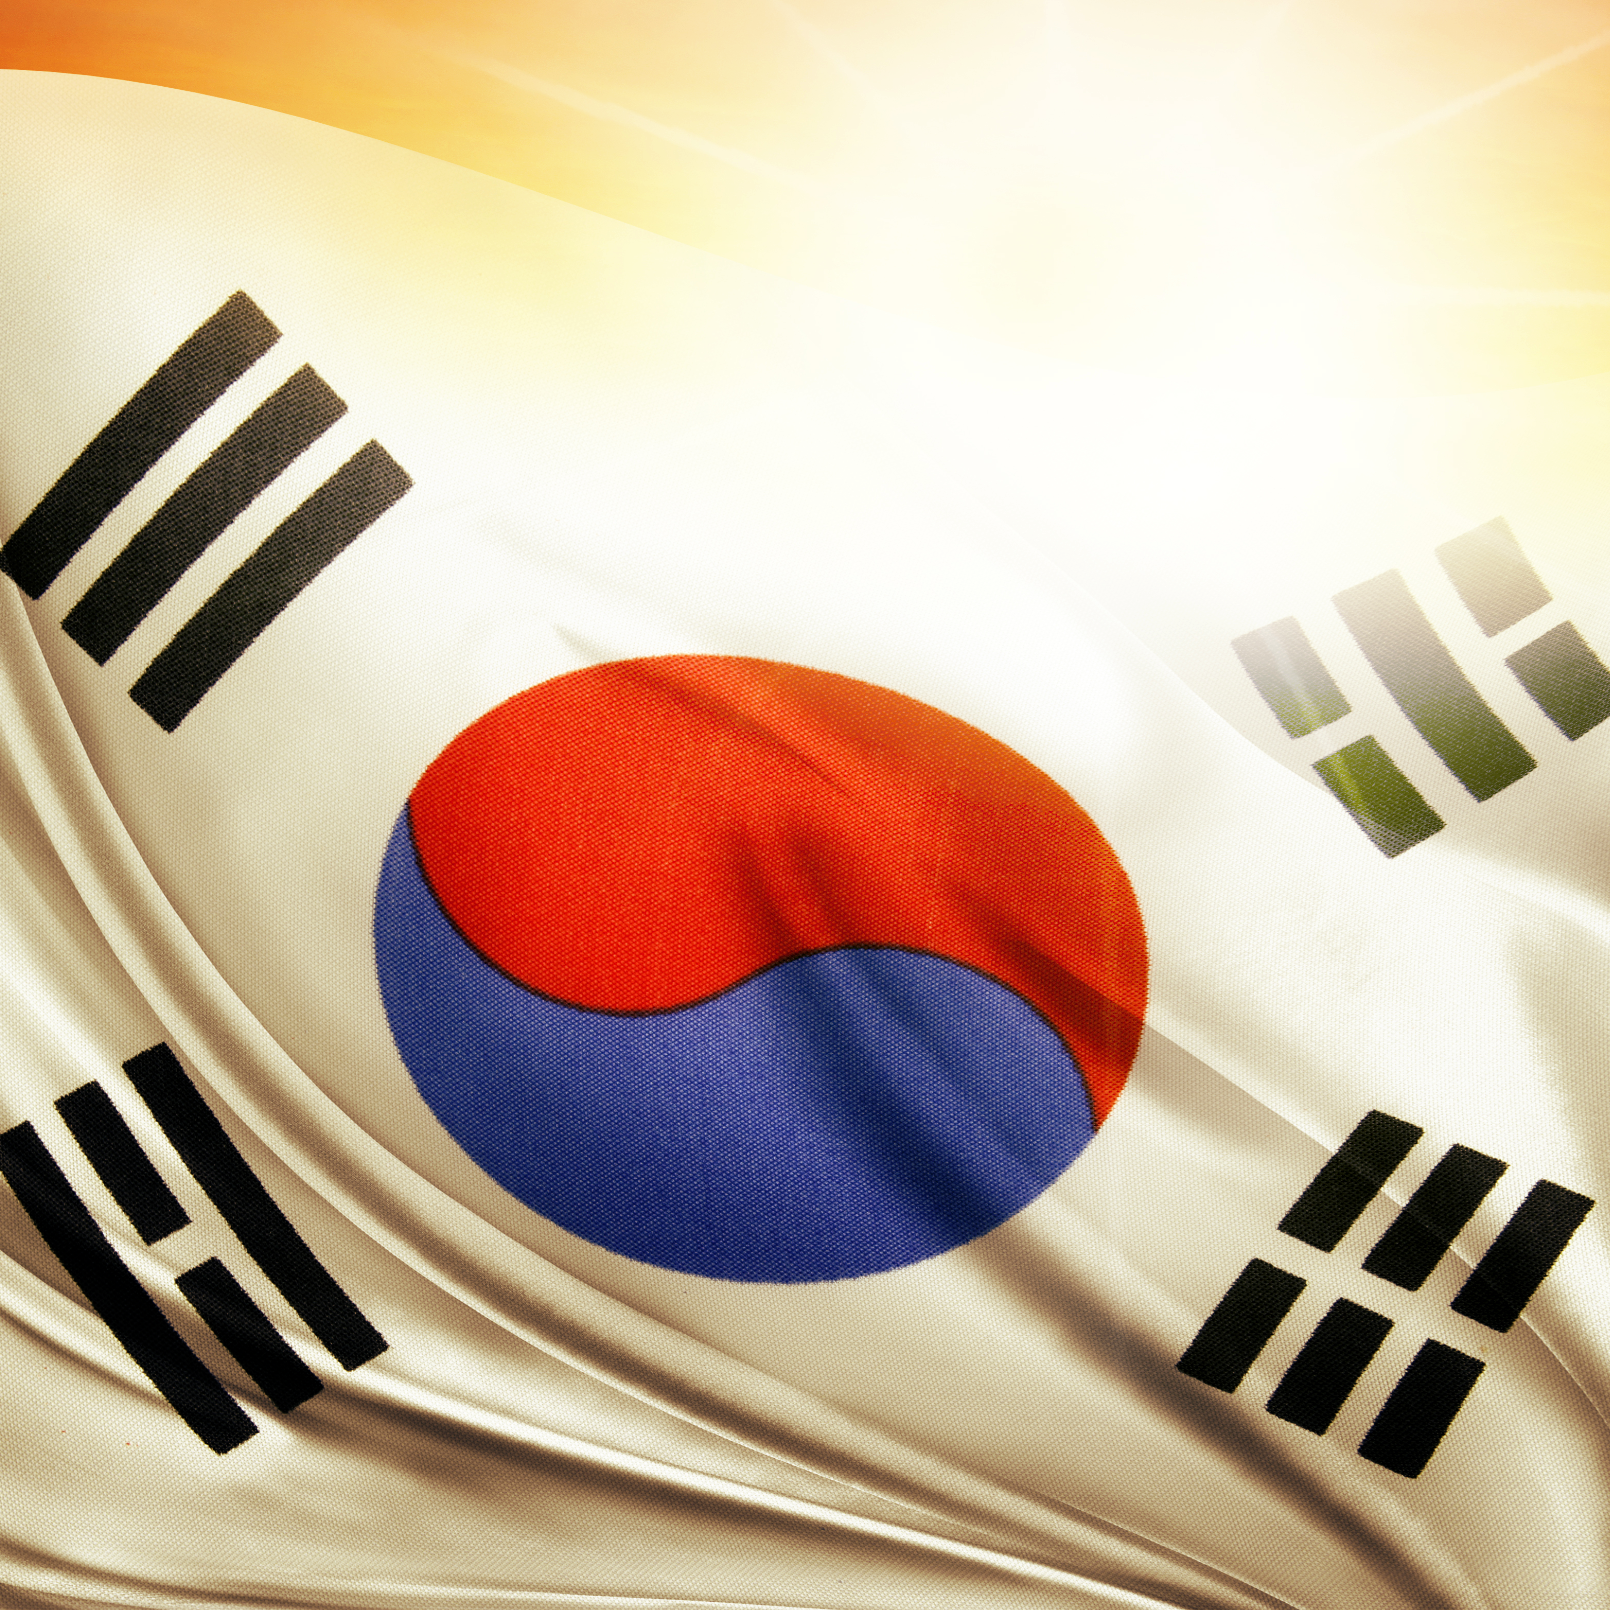 Korea’s Mandatory Crypto Real-Name System Neglected - 19% Conversion Rate